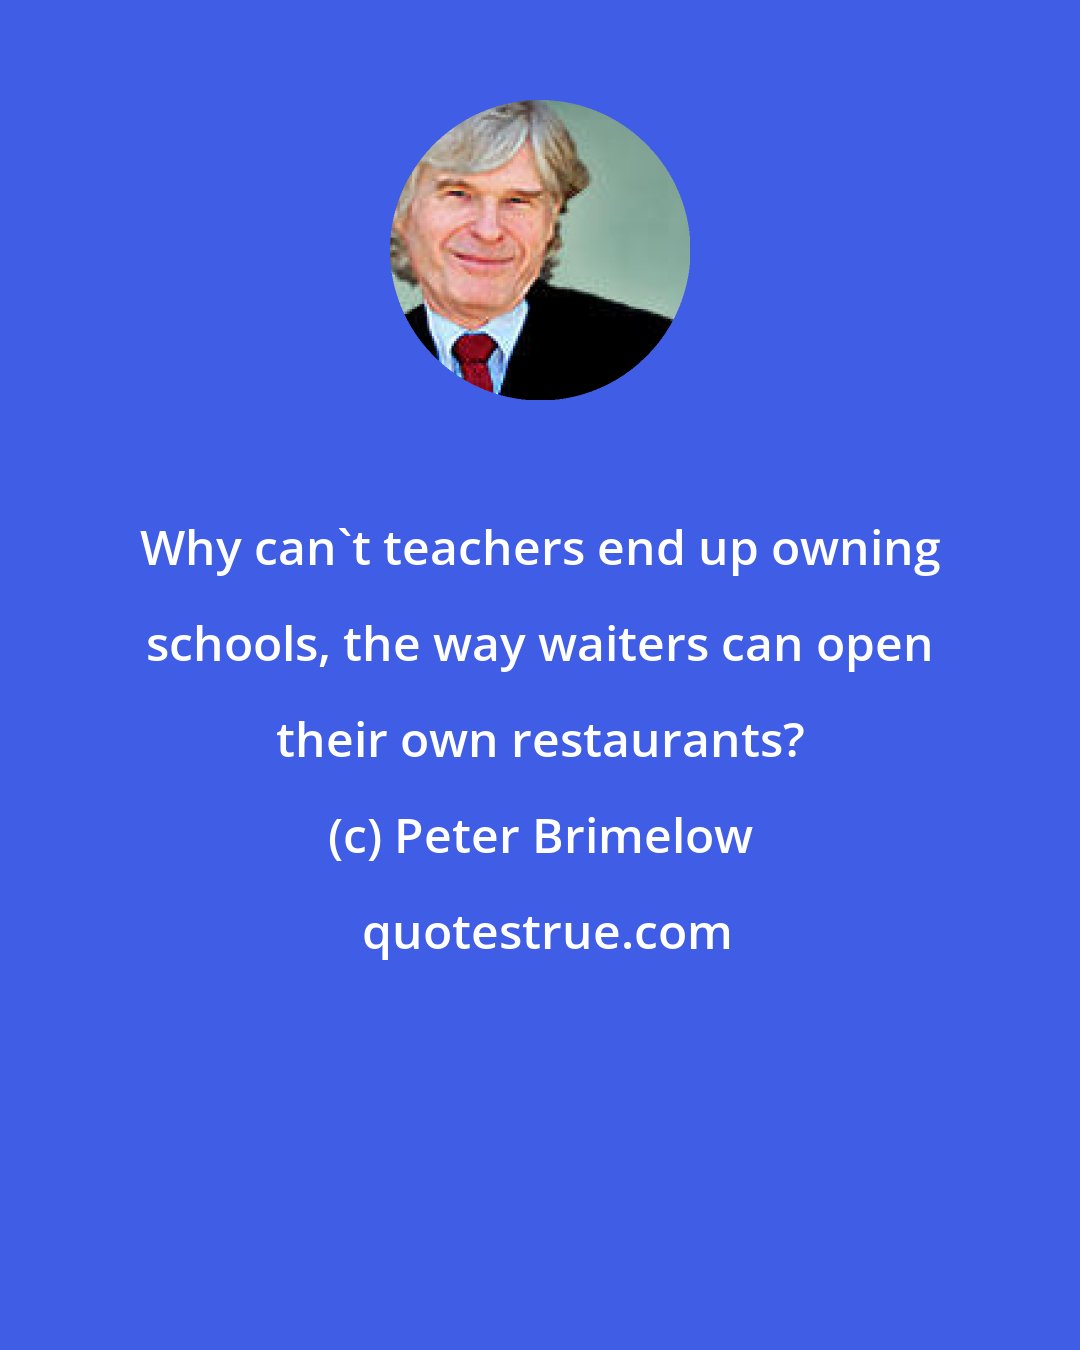 Peter Brimelow: Why can't teachers end up owning schools, the way waiters can open their own restaurants?